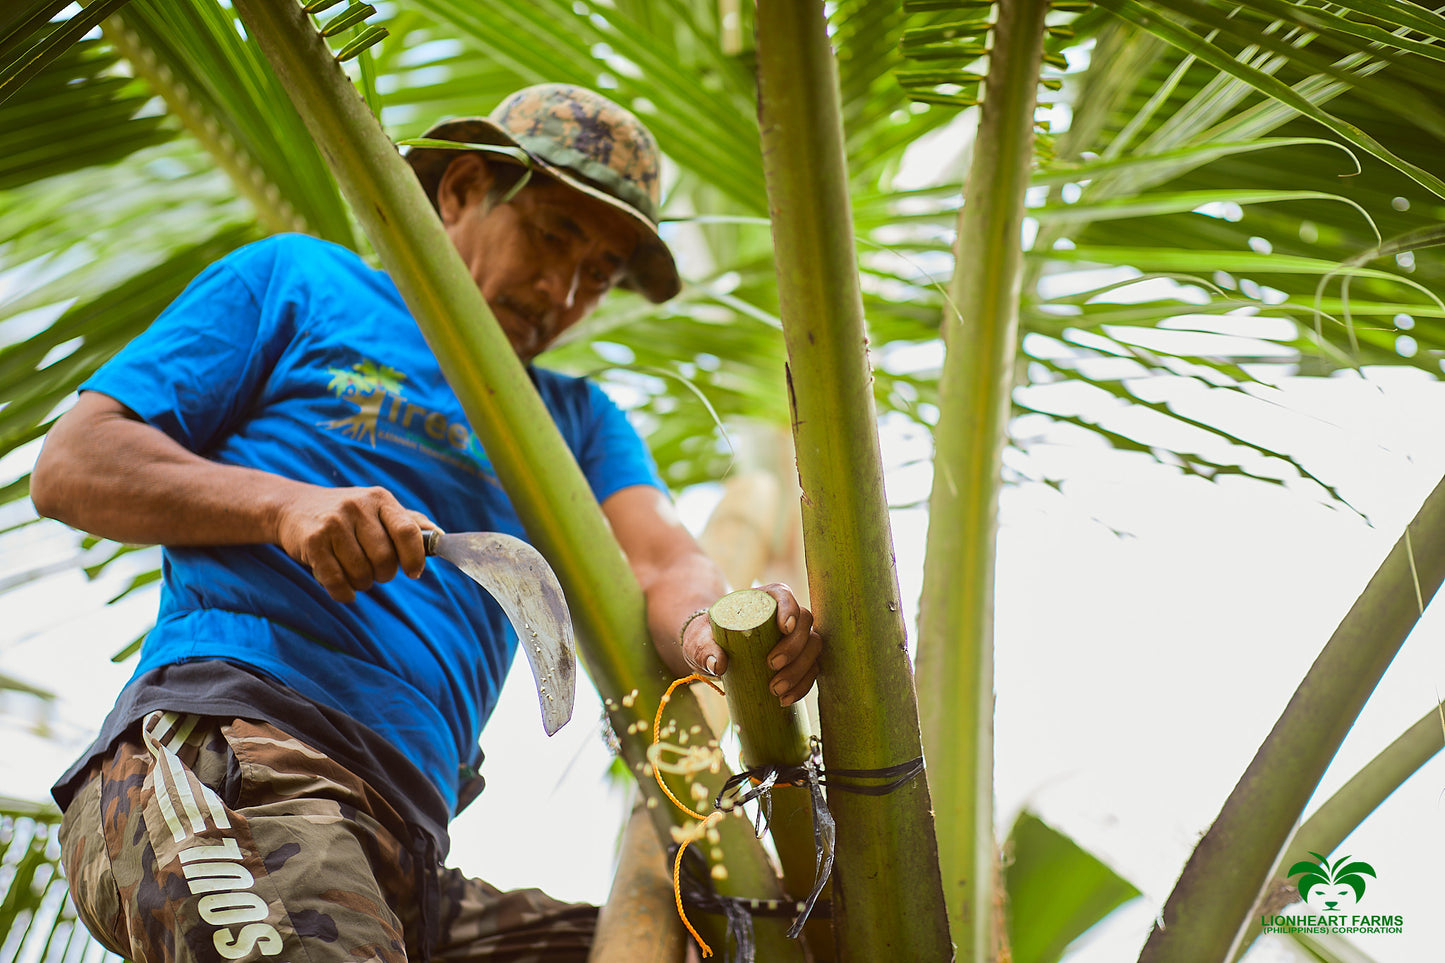 The inspiring story of Lionheart Farms and coconut farmers in Palawan